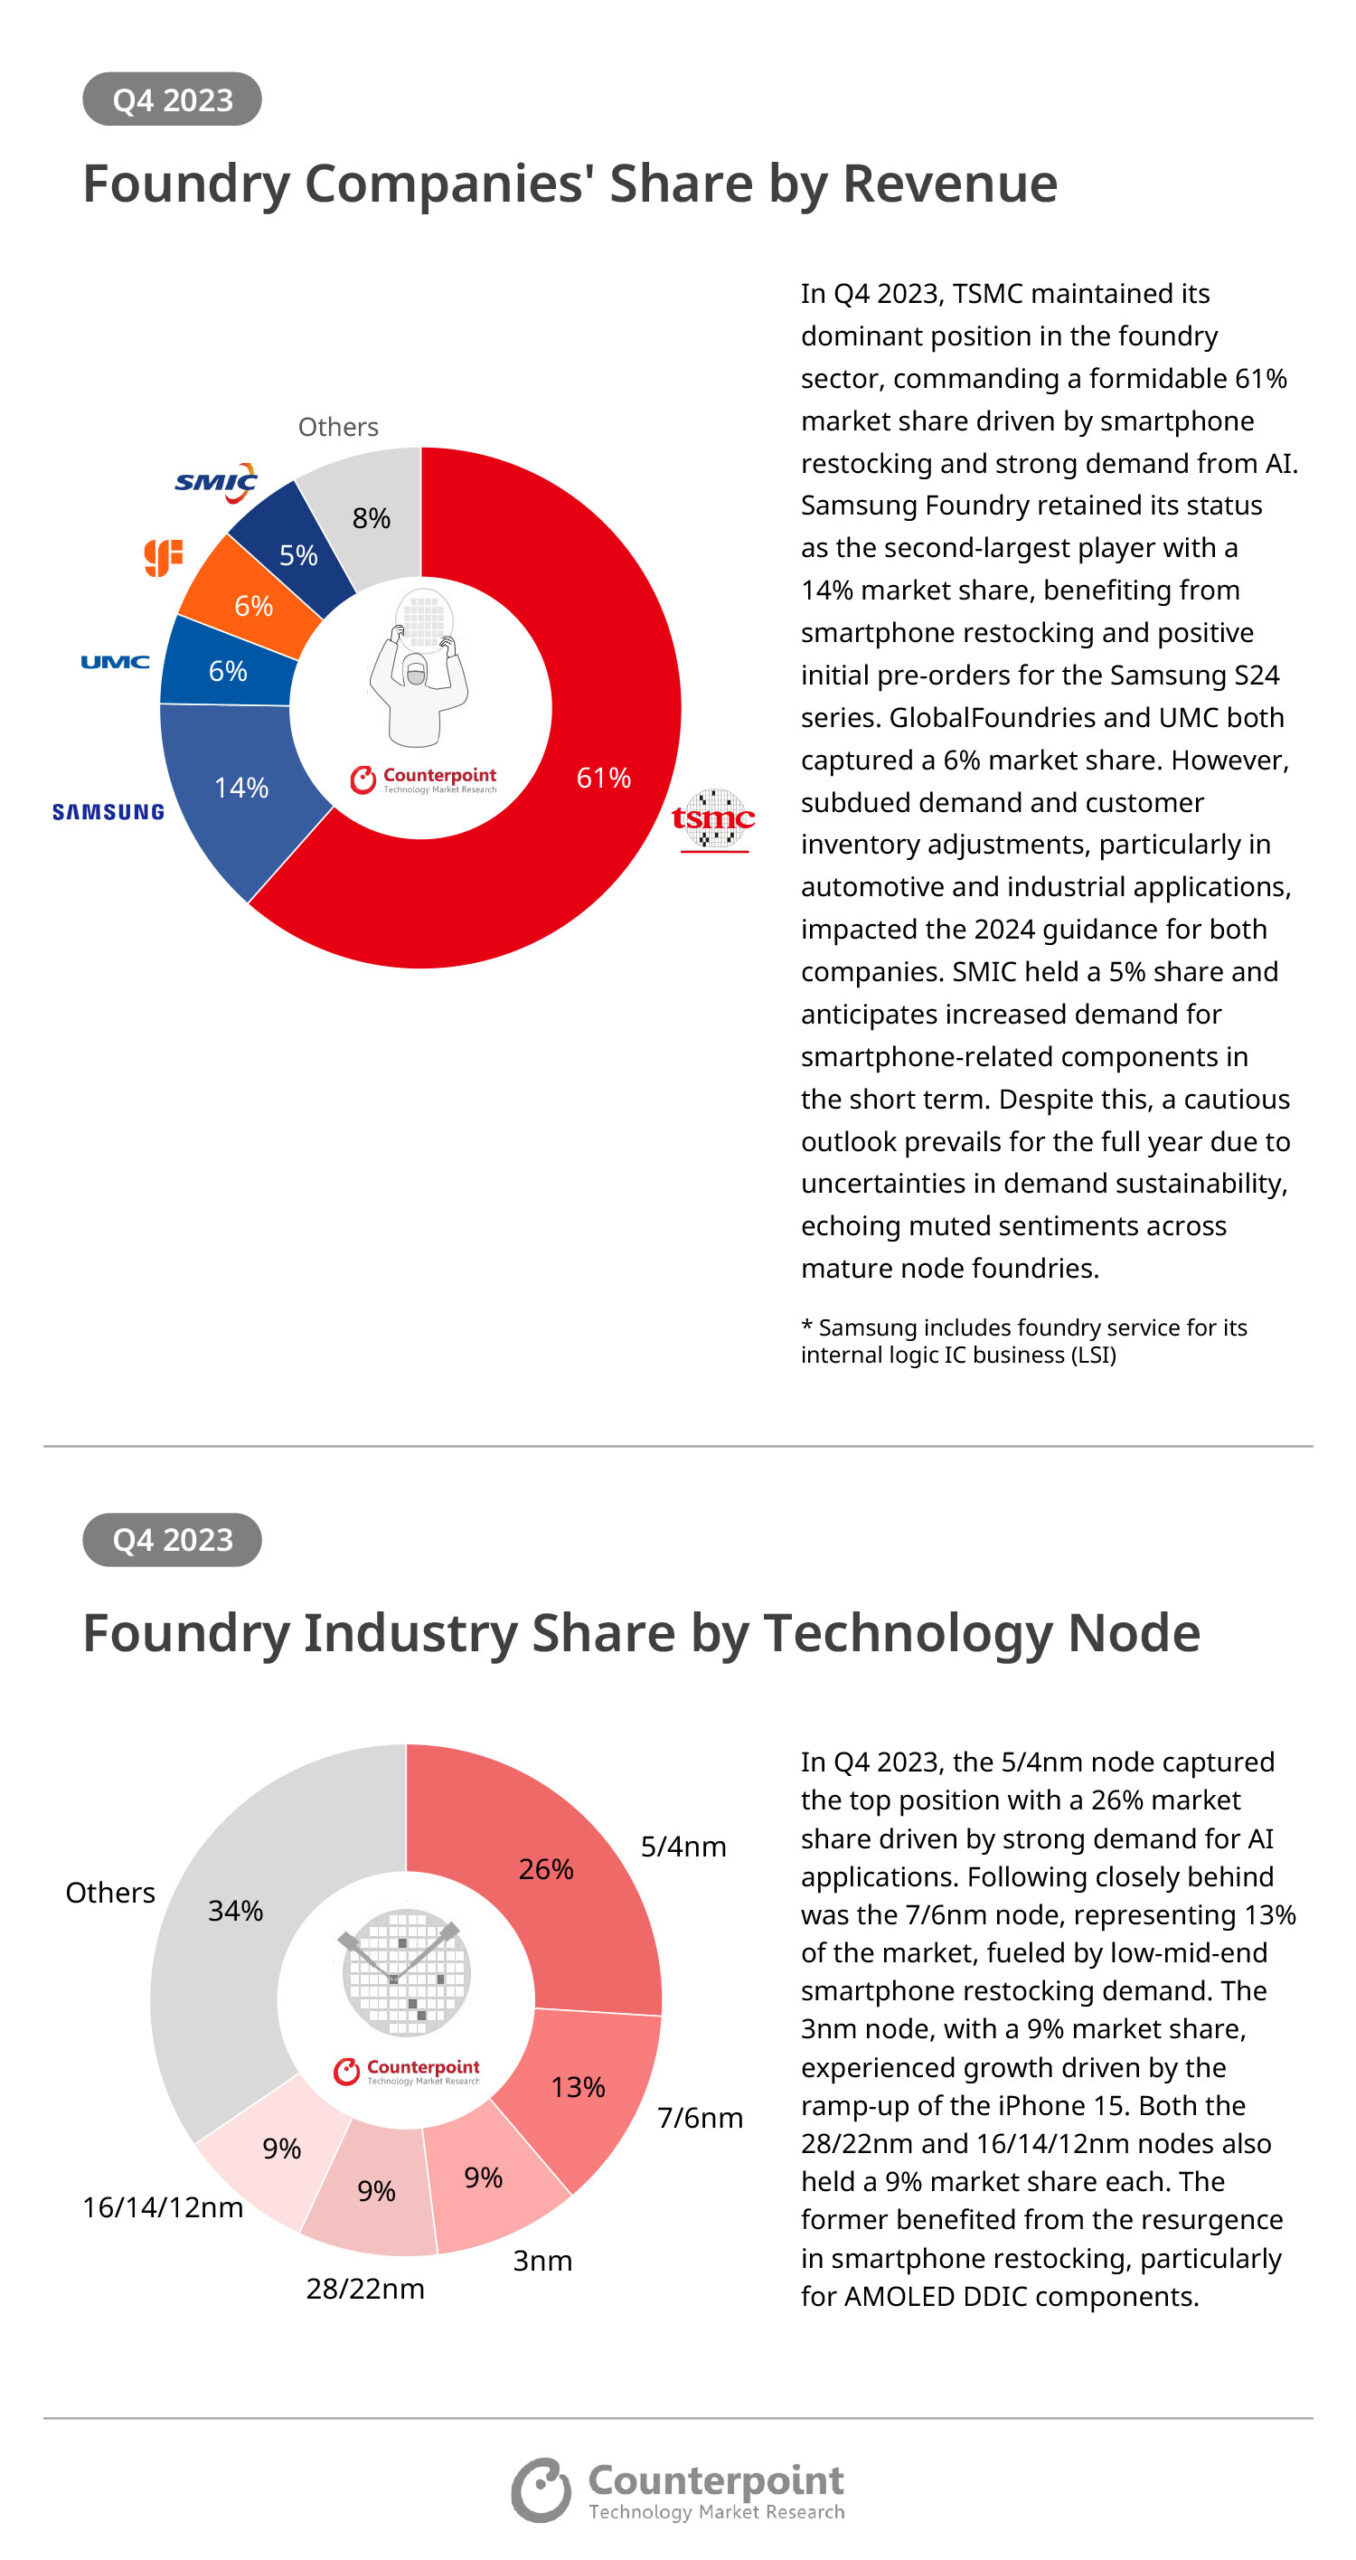 Foundry Companies' Share by Revenue, Q4 2023